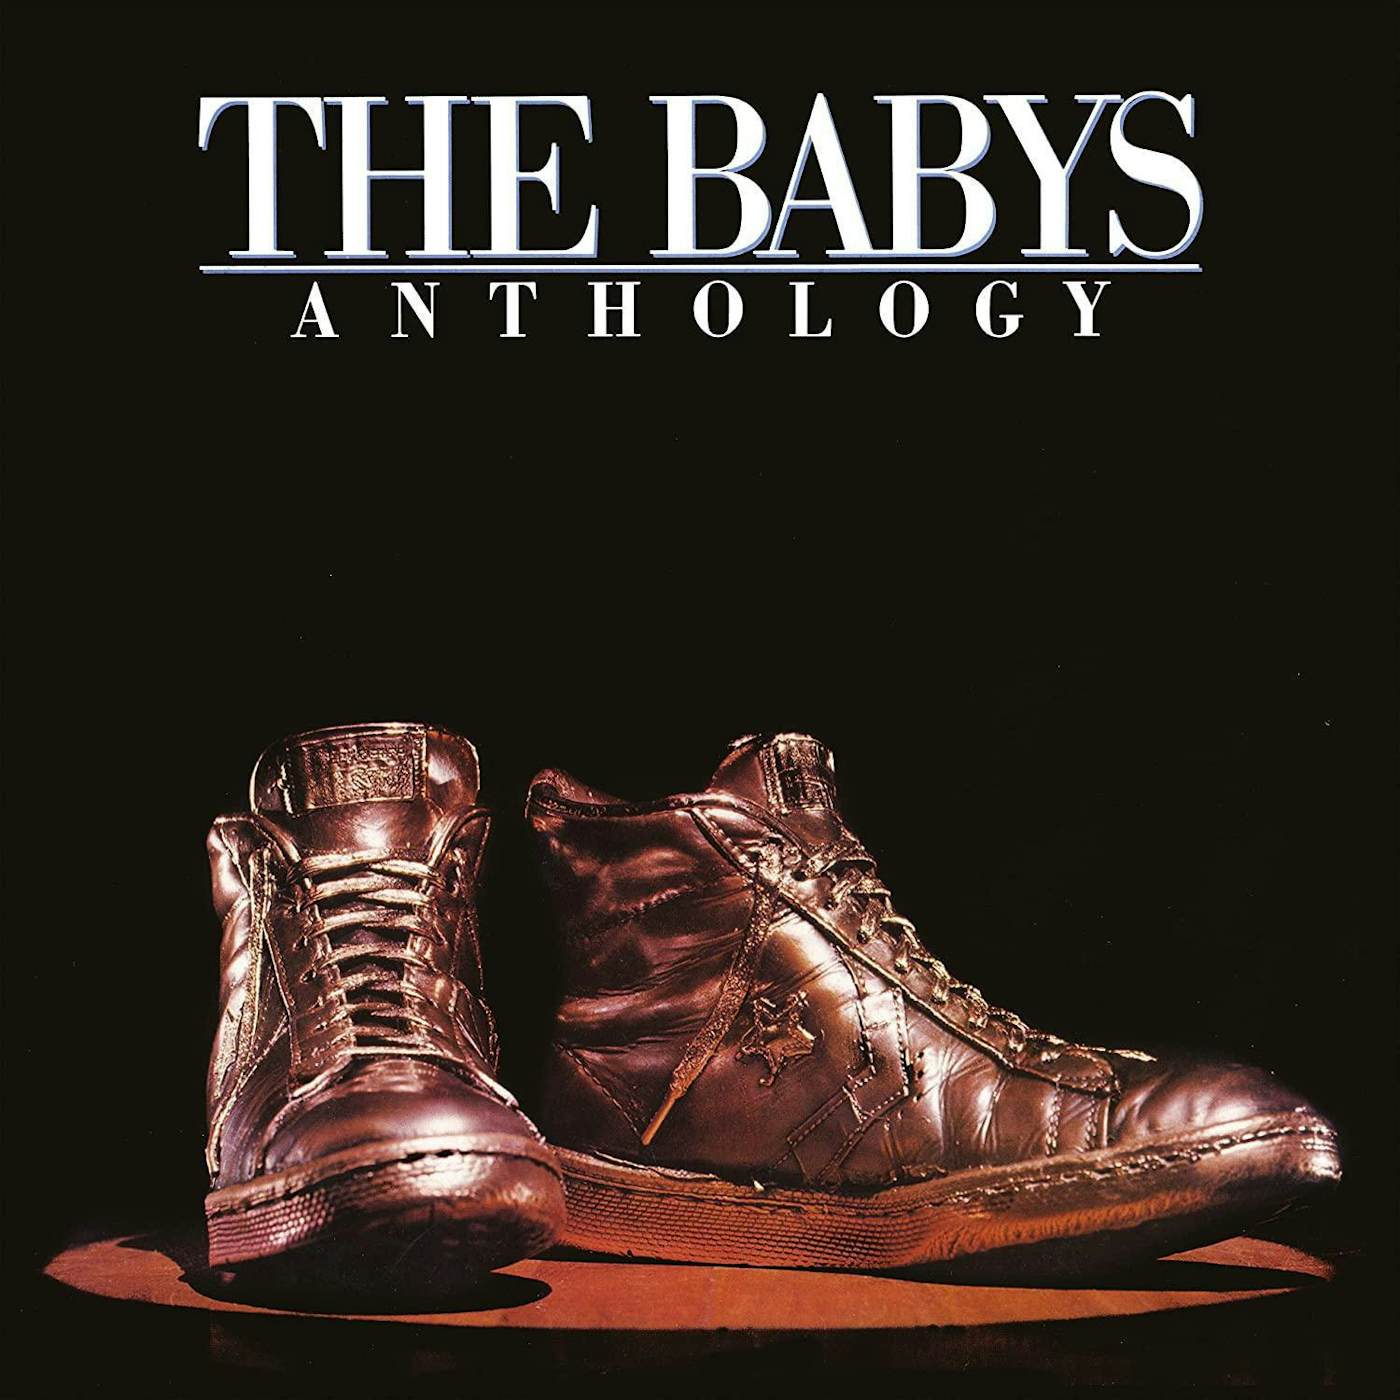 The Babys Anthology (Clear) Vinyl Record